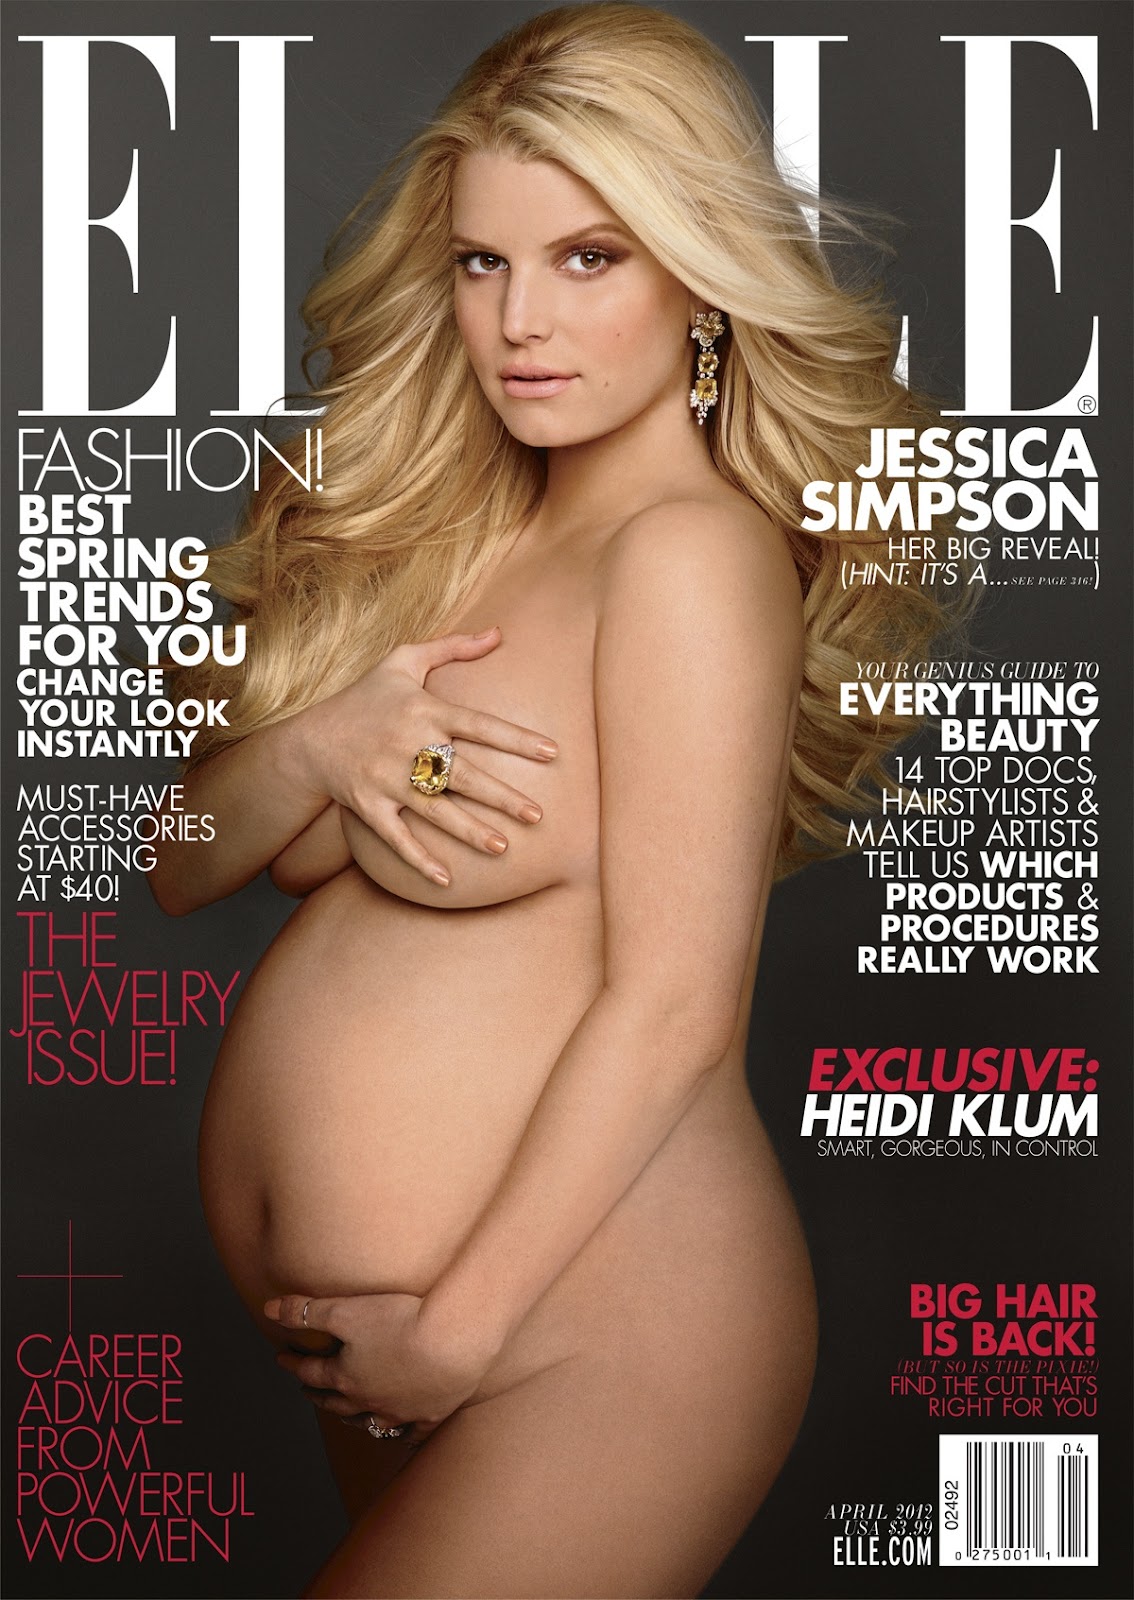 http://4.bp.blogspot.com/-t234Y3RQZCw/T6KJXStyABI/AAAAAAAAIO0/7Cd0wsKnsIA/s1600/1Singer+-+actor+Jessica+Simpson+has+delivered+a+baby+girl+-+and+they+have+named+her+Maxwell+Drew+Johnson.+According+to+reports%252C+the+proud+parents+have+said+that+they+would+call+her+Maxi+for+short.jpg